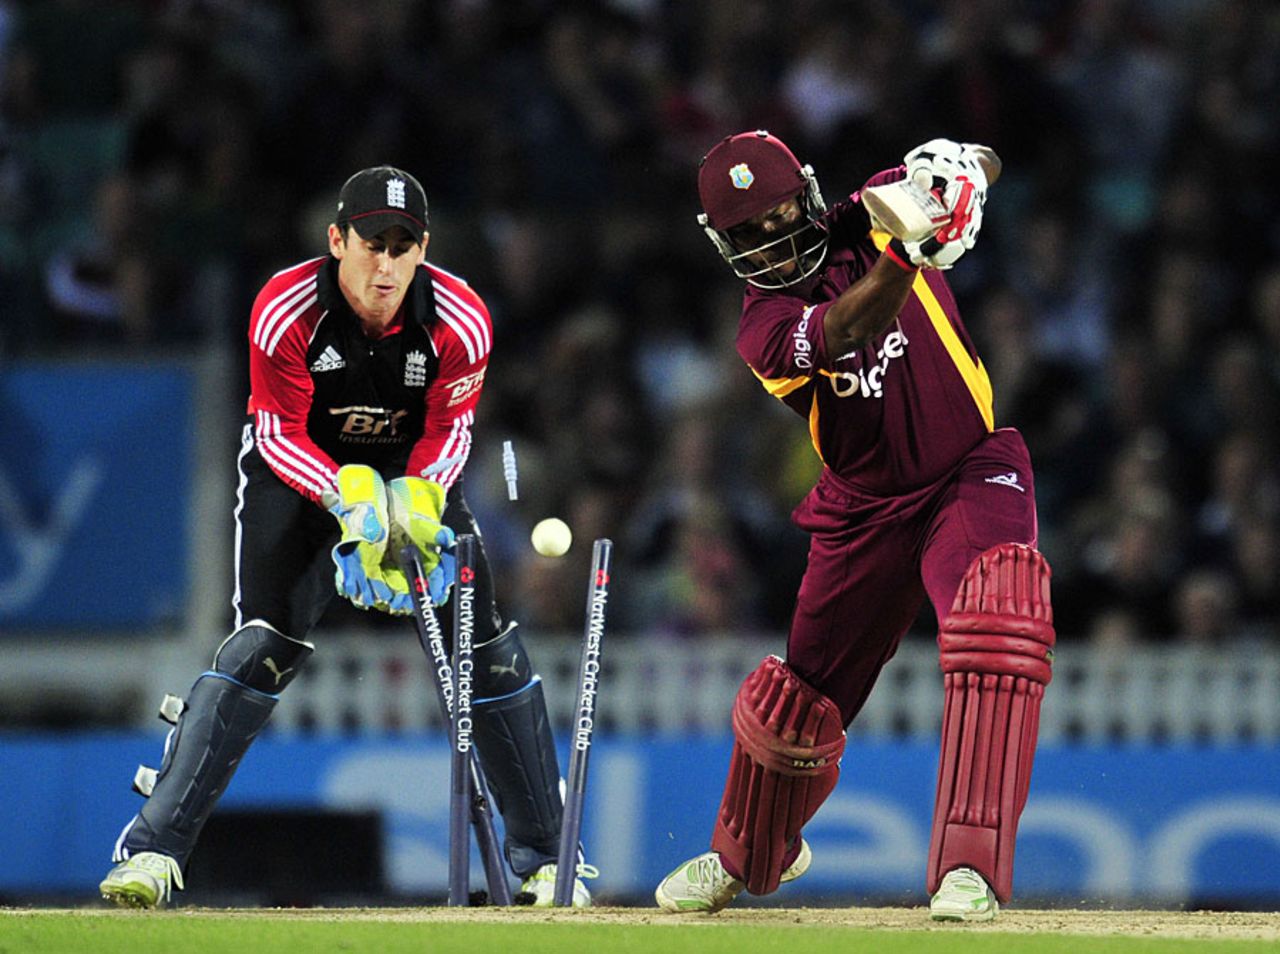 Johnson Charles was bowled to become Scott Borthwick's first wicket, England v West Indies, 2nd Twenty20, The Oval, September 25, 2011